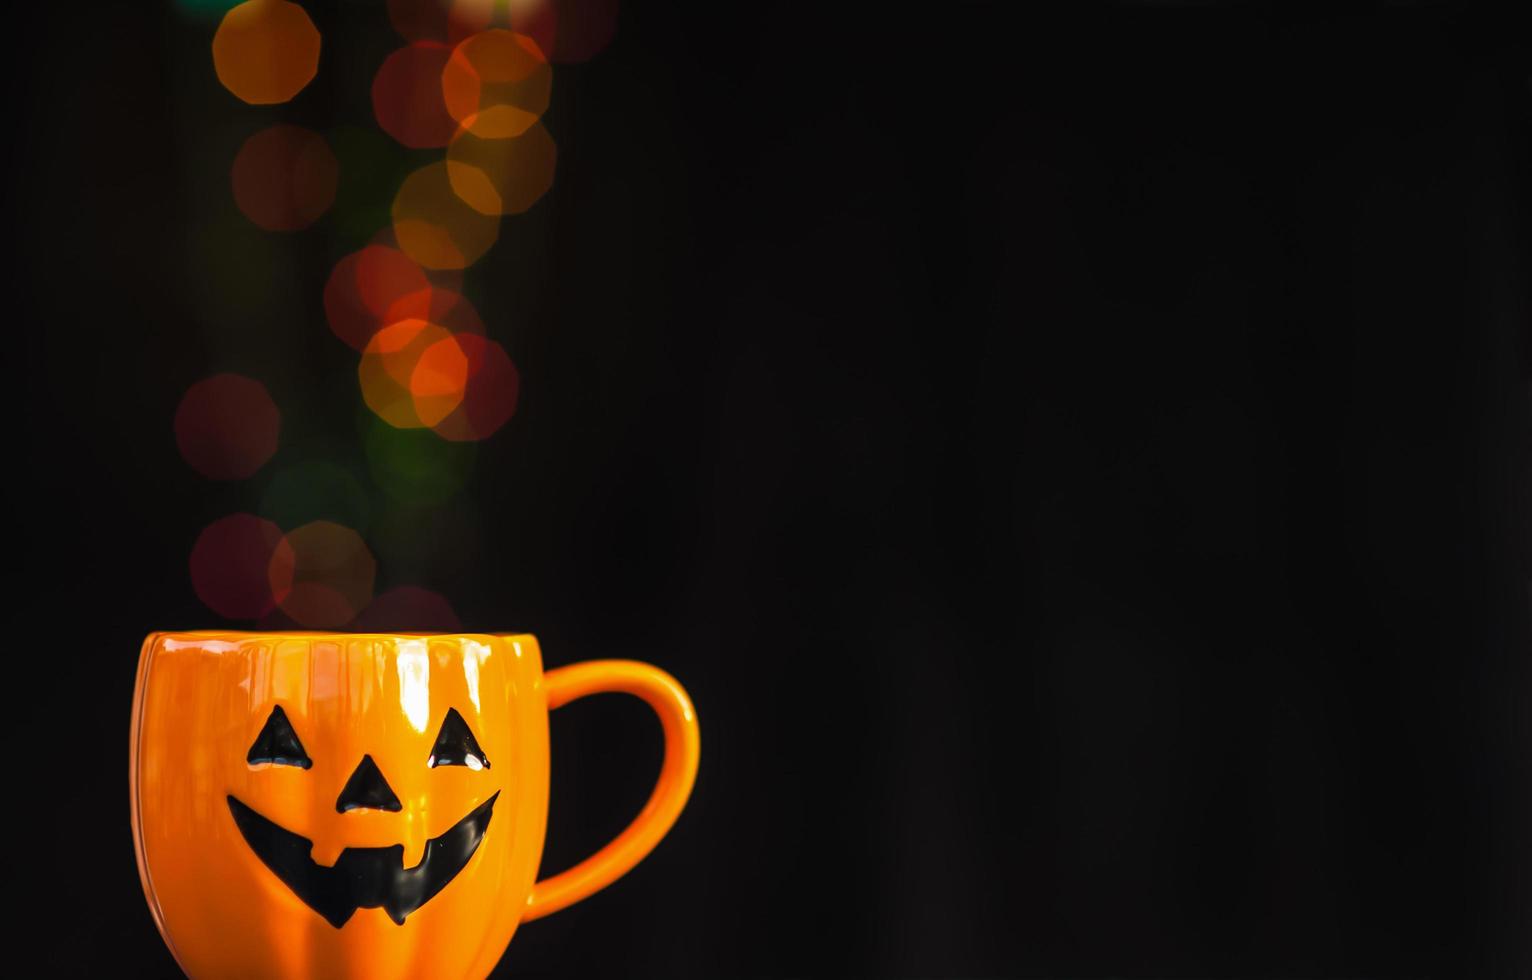 Halloween pumpkin face buckets with colorful candy photo